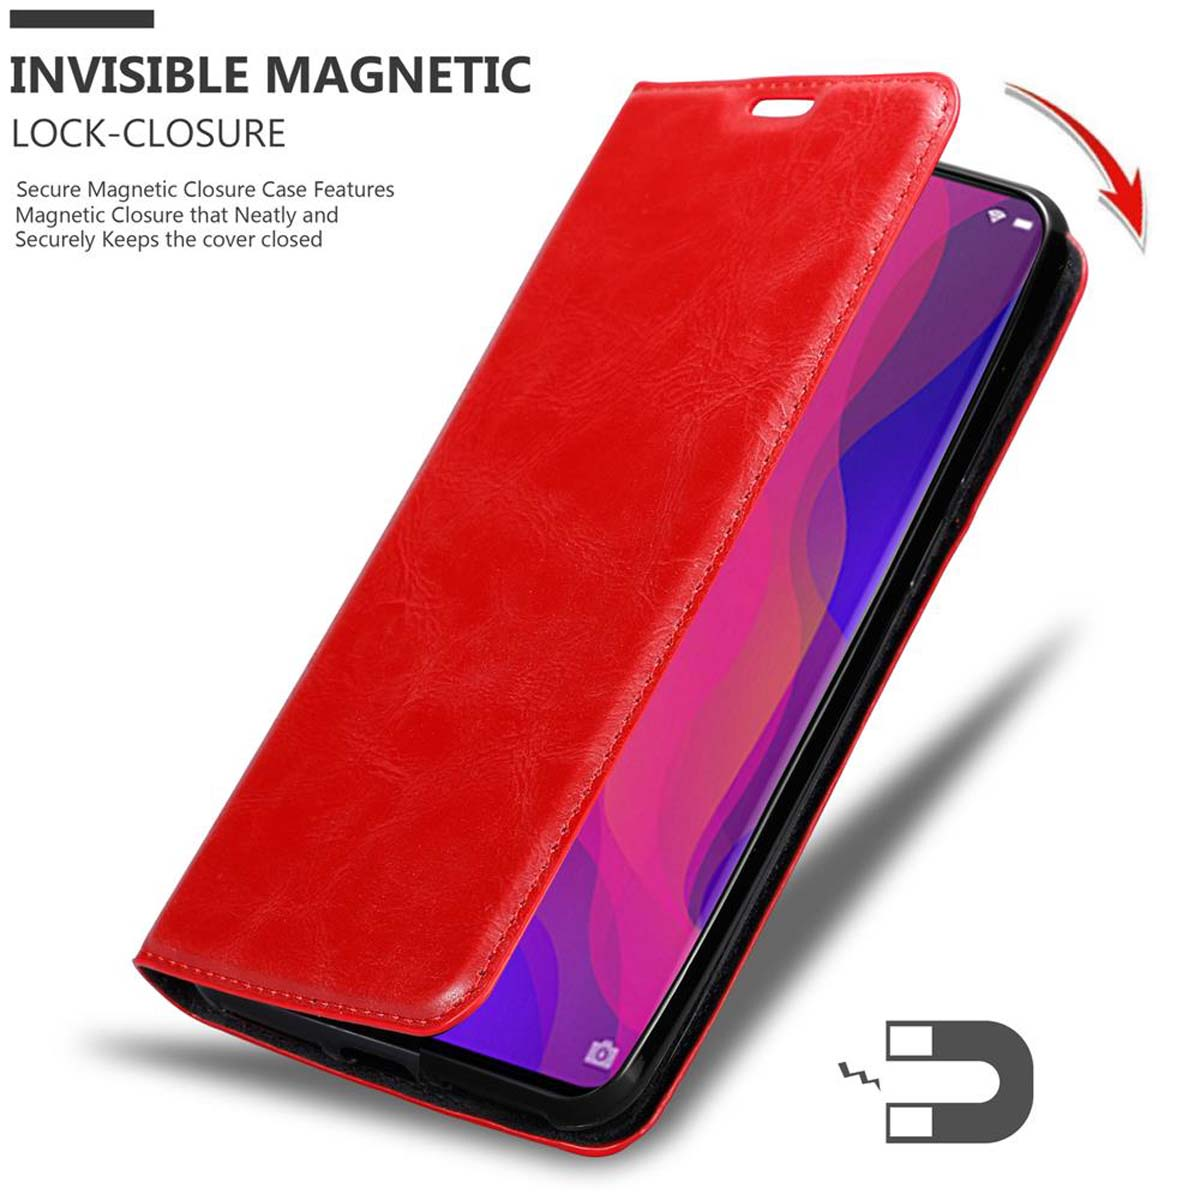 Oppo, Magnet, X, FIND Hülle Invisible CADORABO Bookcover, APFEL Book ROT